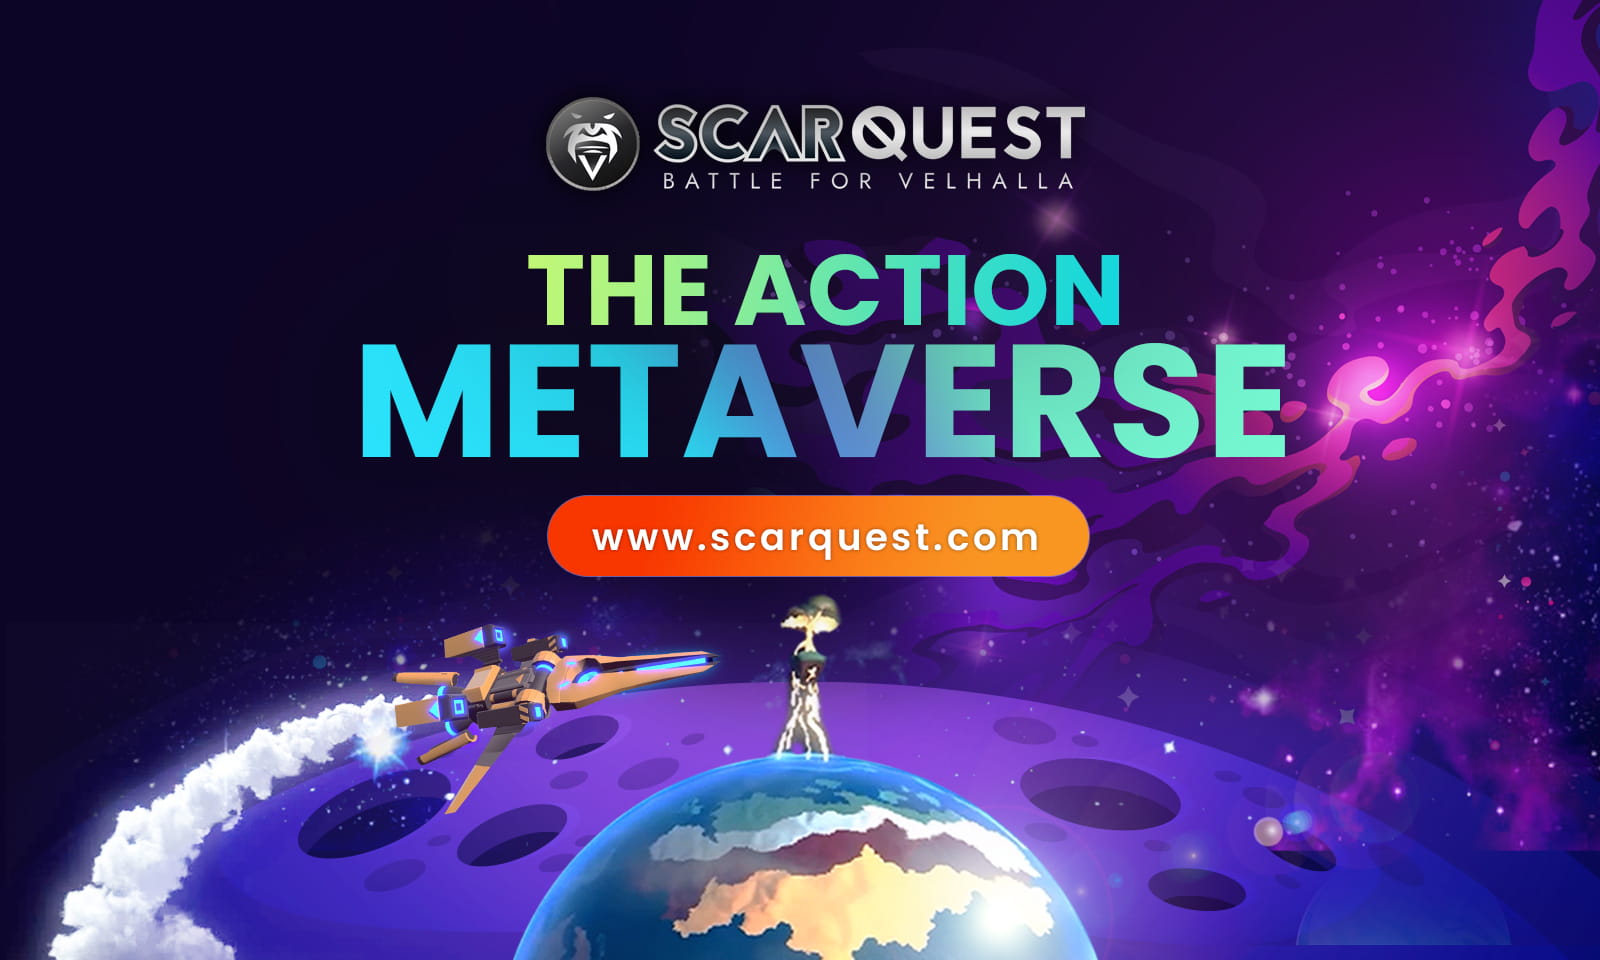 ScarQuest: Ultimate Game to Earn Crypto and Have Fun